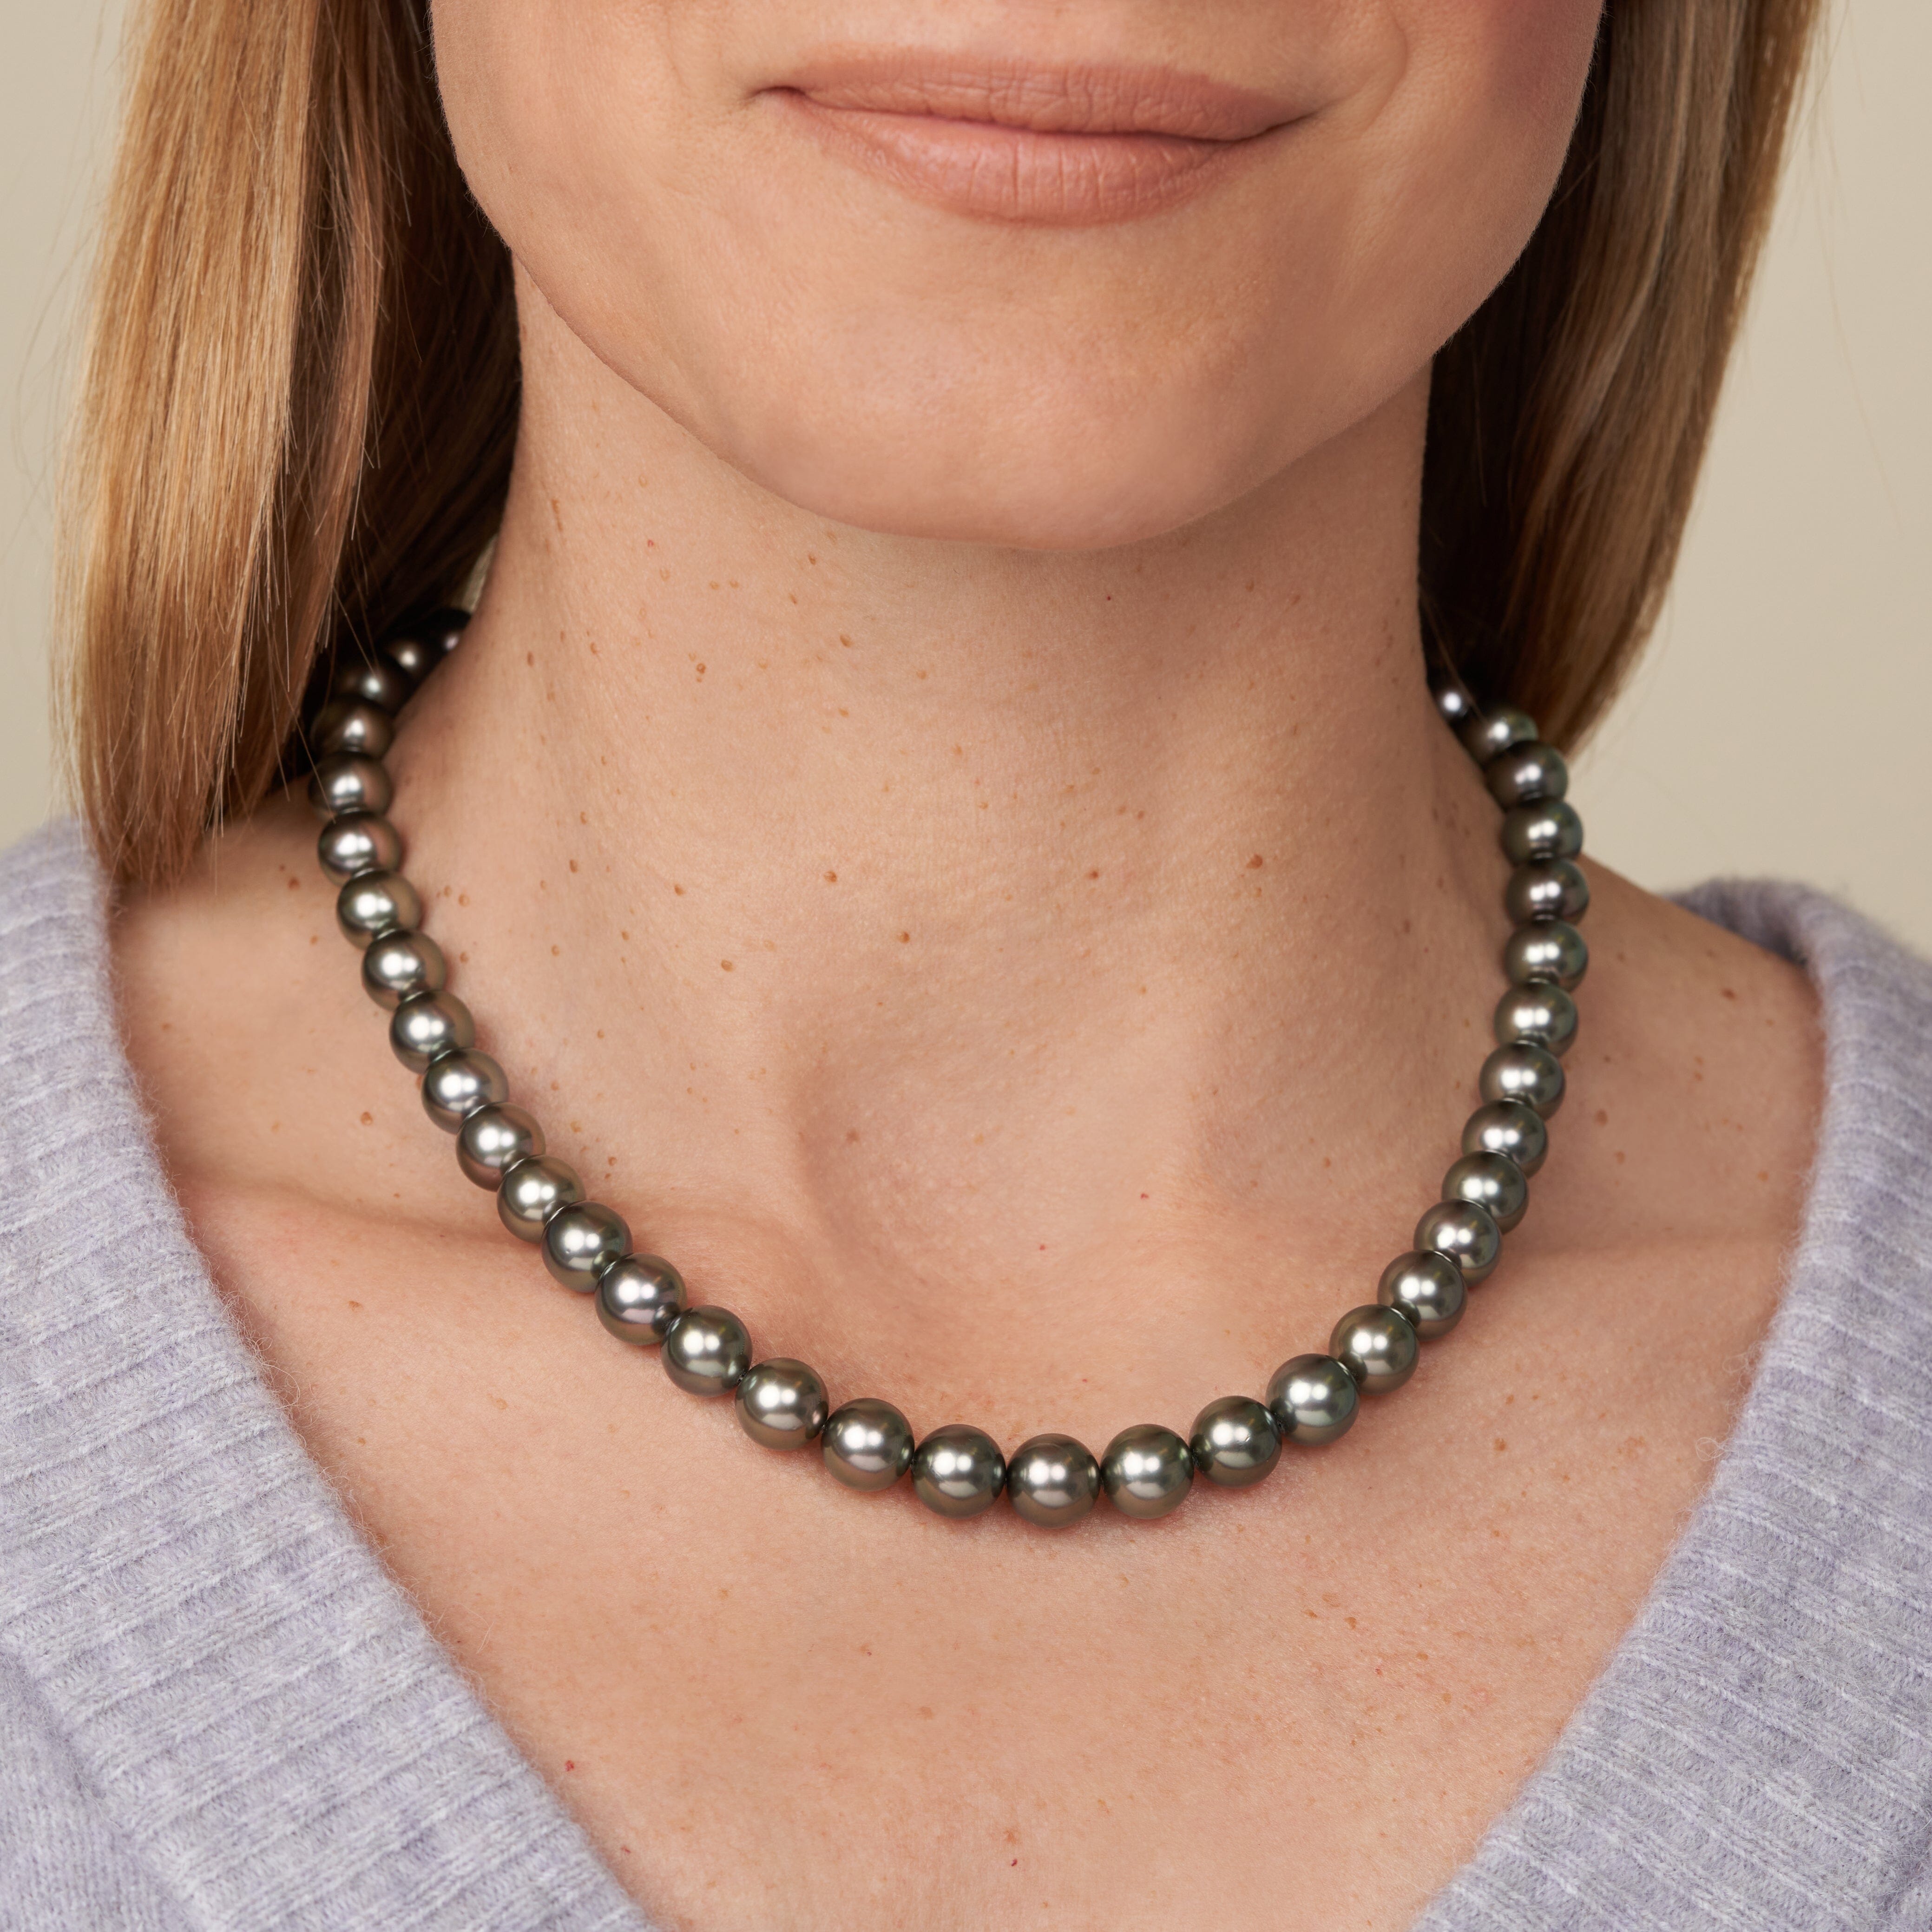 18-inch 9.0-9.9 mm AA+/AAA Round Tahitian Pearl Necklace